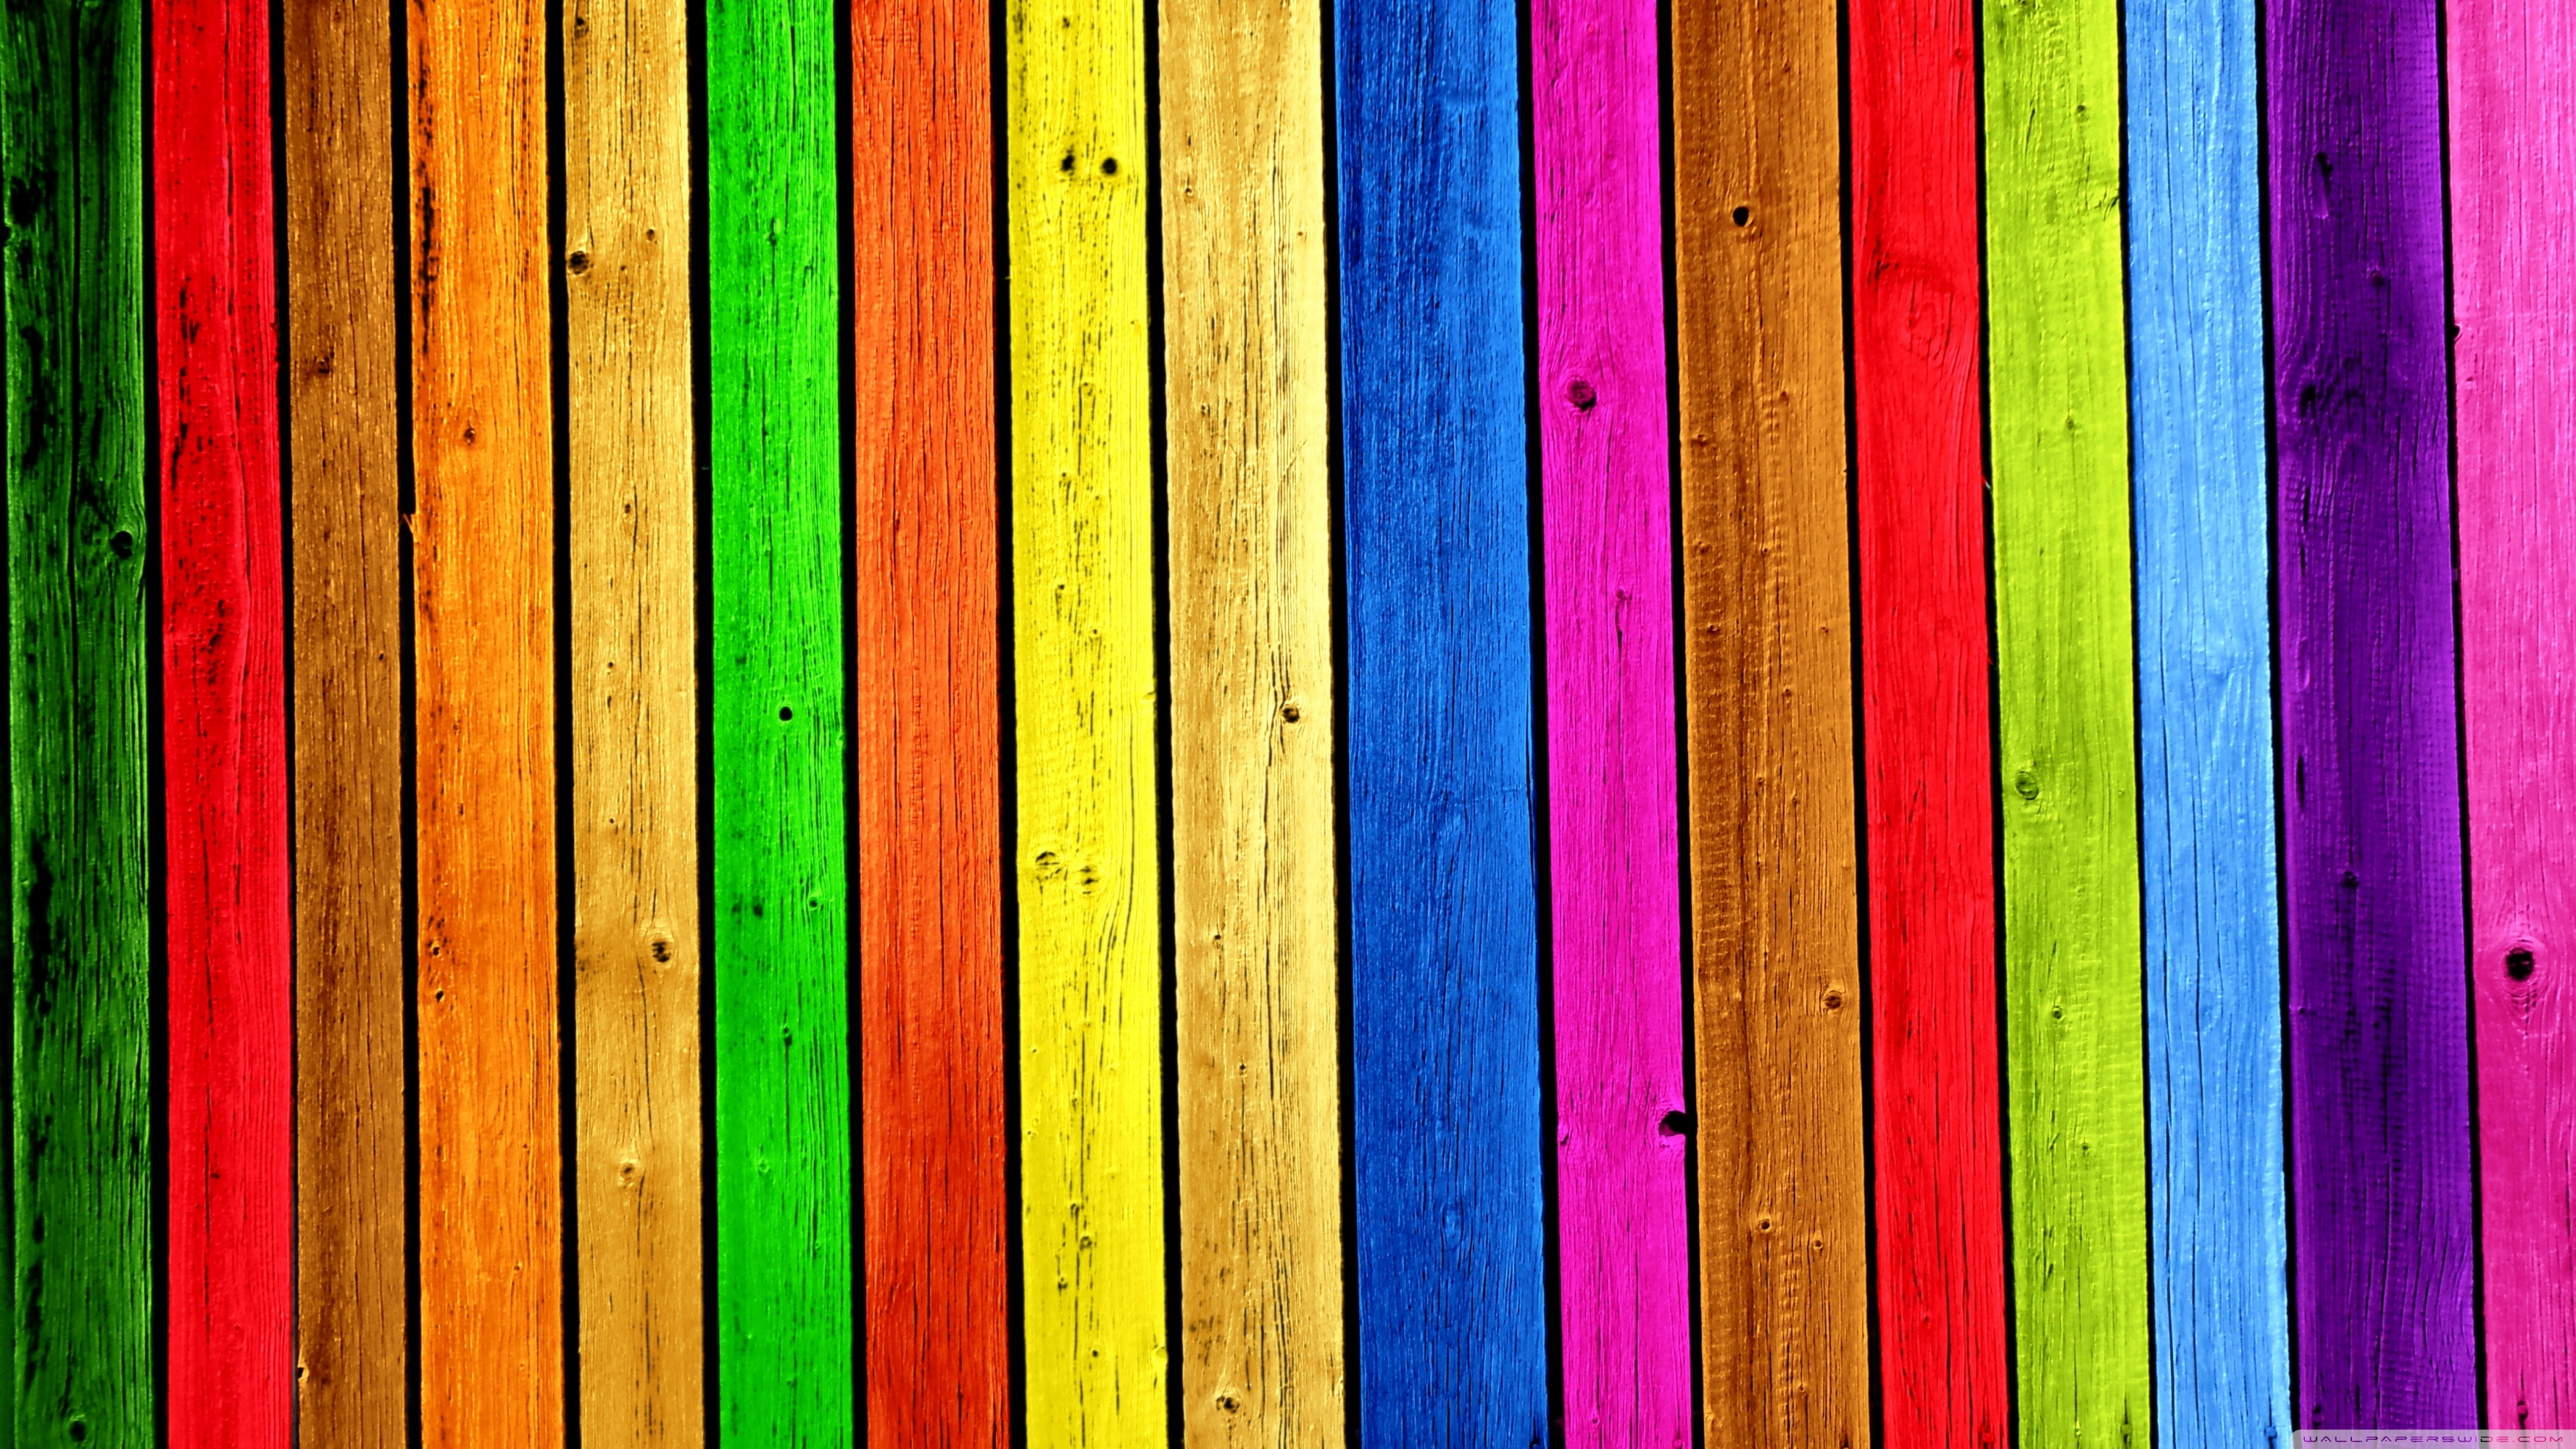 Rainbow Background Images Hd - HD Wallpaper 